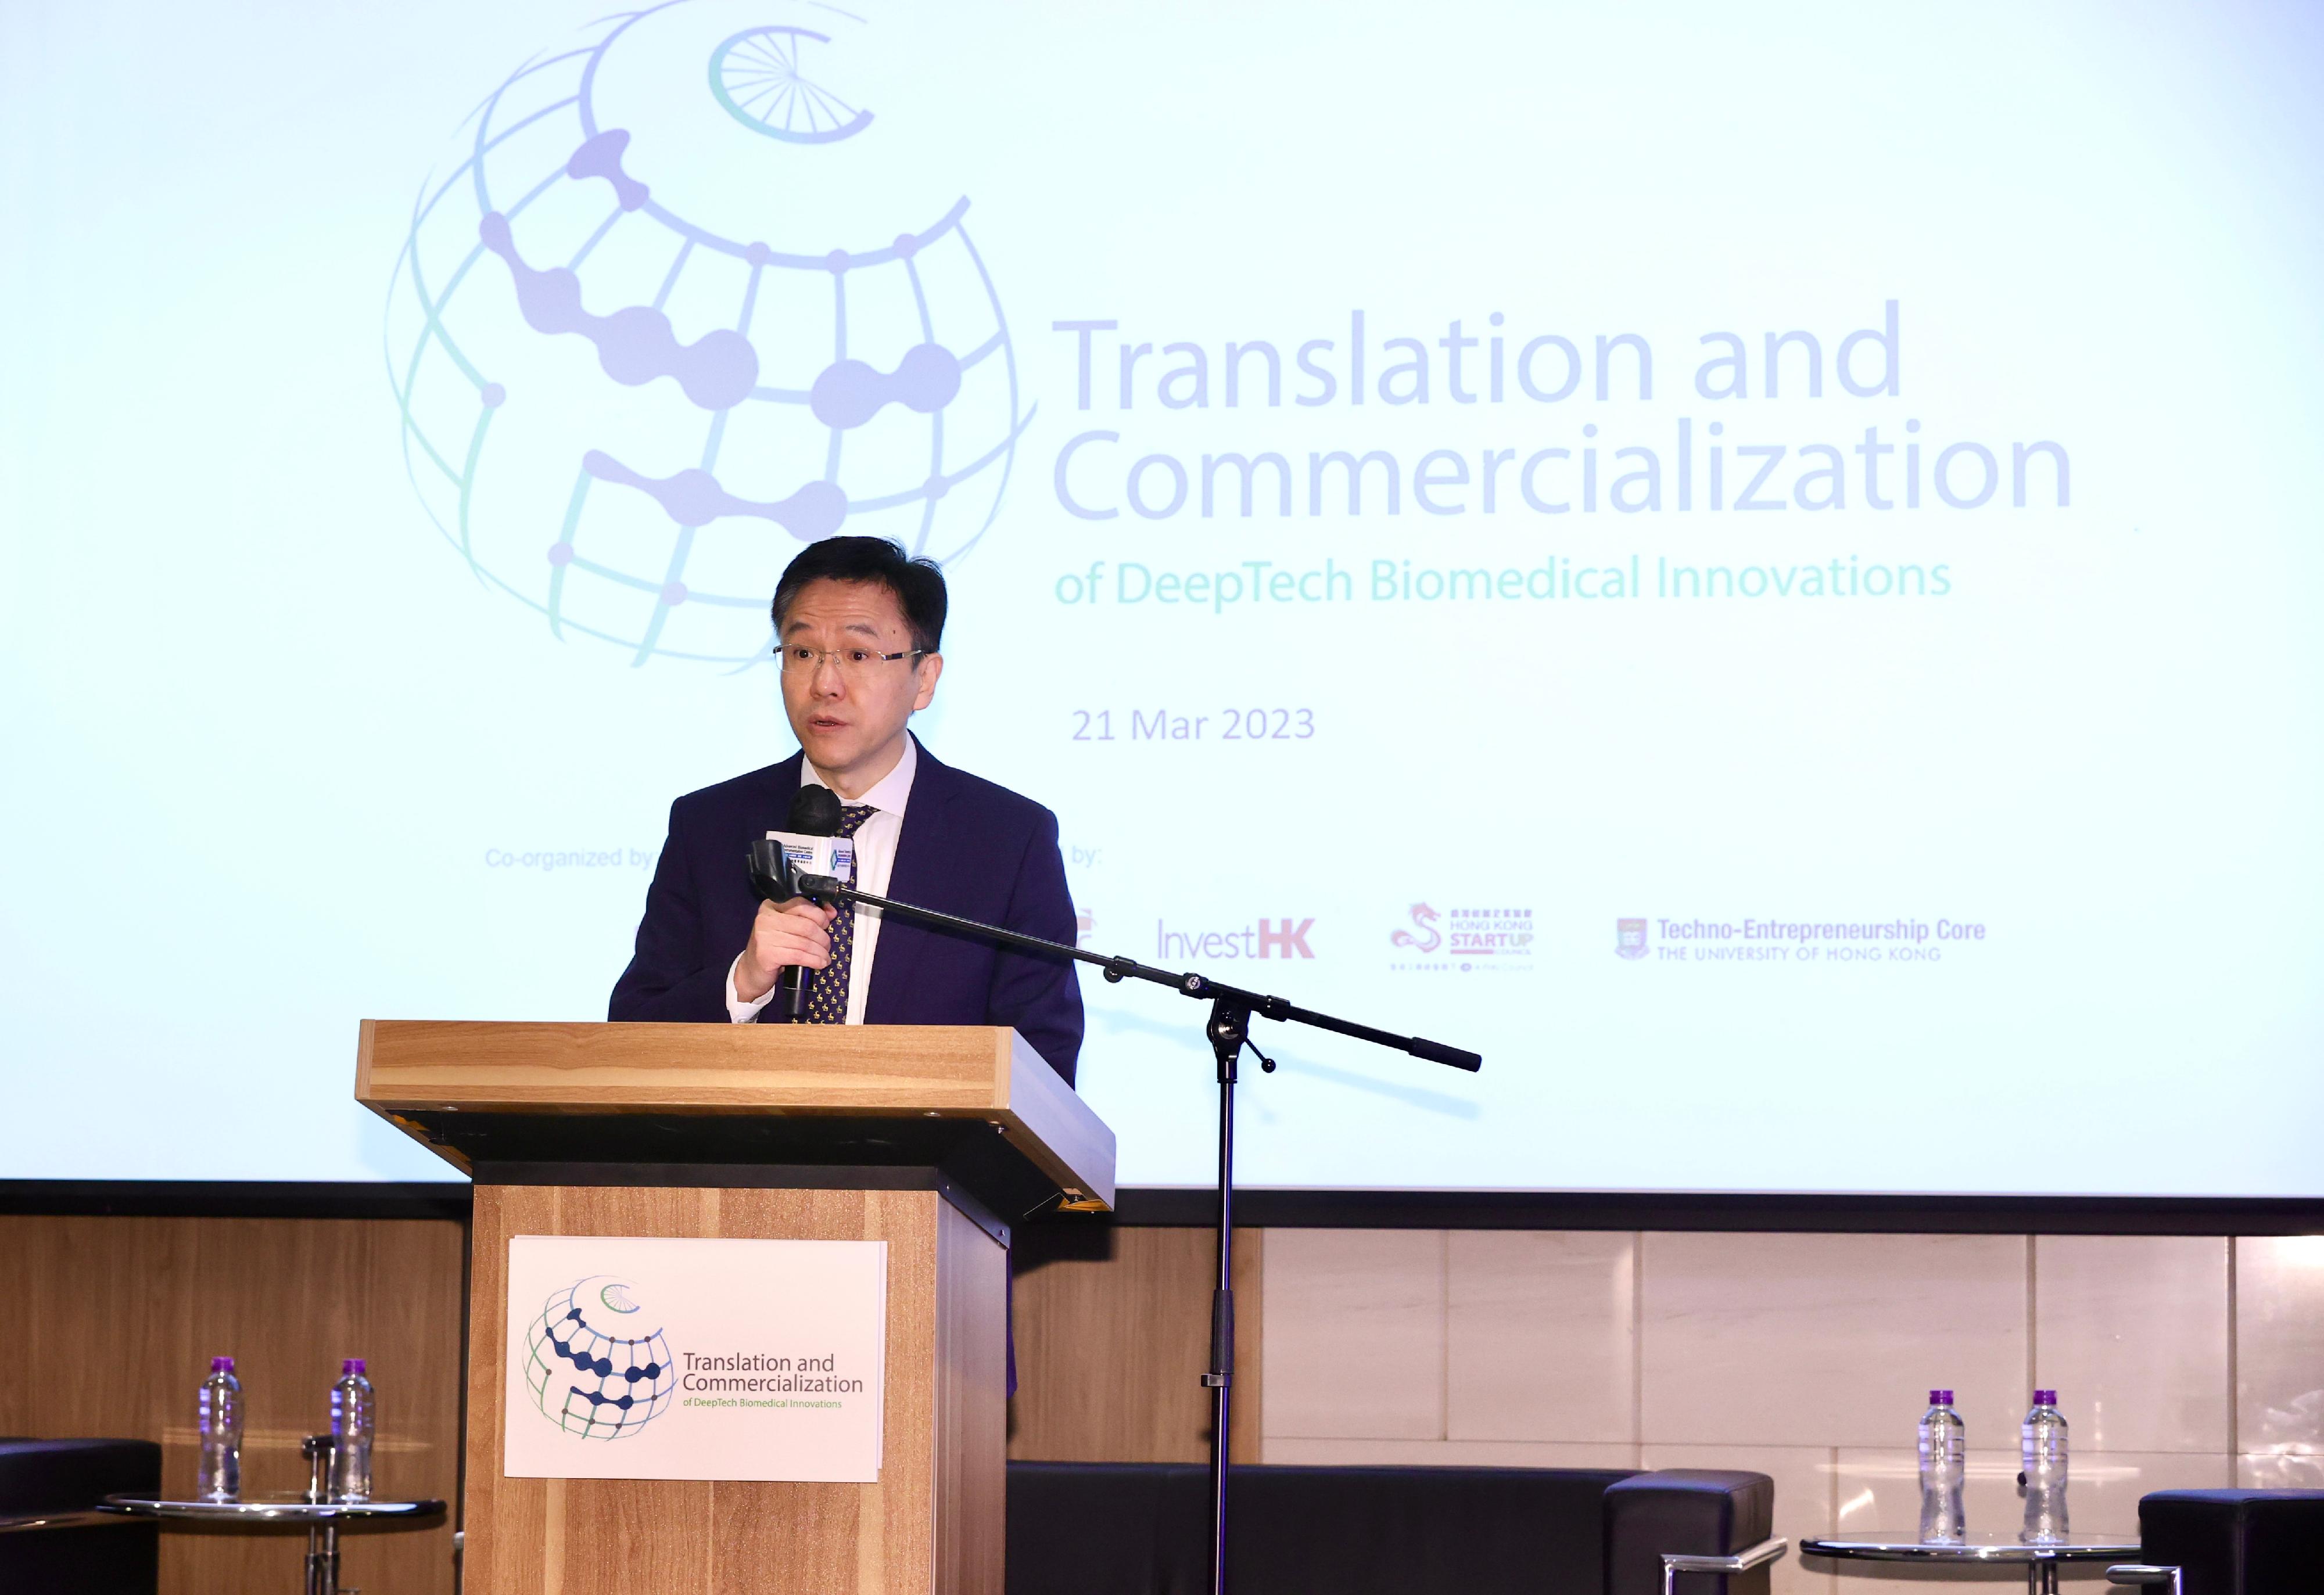 The Secretary for Innovation, Technology and Industry, Professor Sun Dong, speaks at the Symposium on Translation and Commercialization of DeepTech Biomedical Innovations today (March 21).
